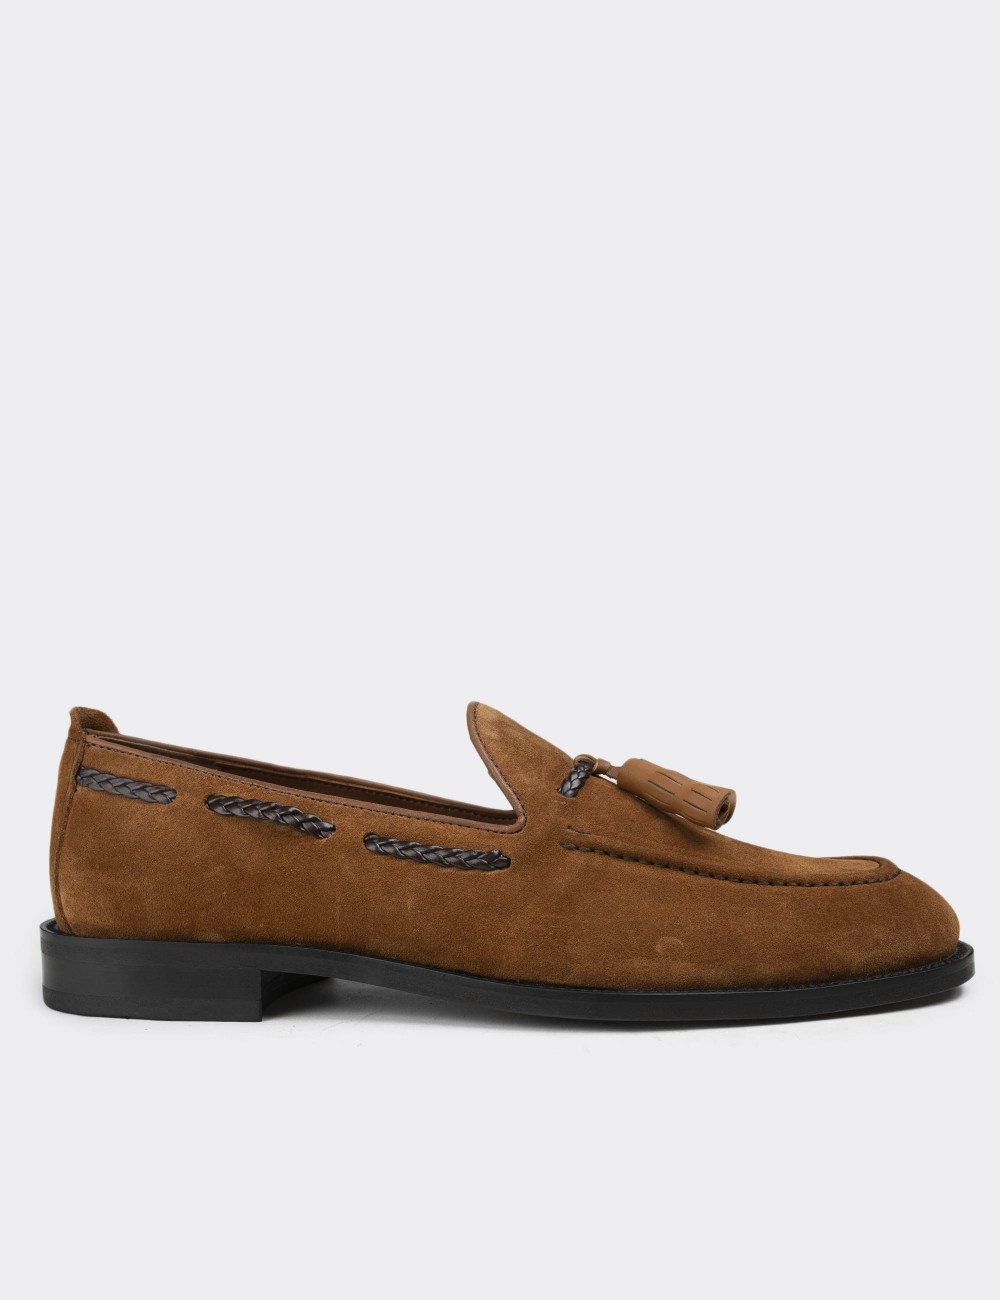 Brown Suede Leather Loafers - 01642MTRNM01